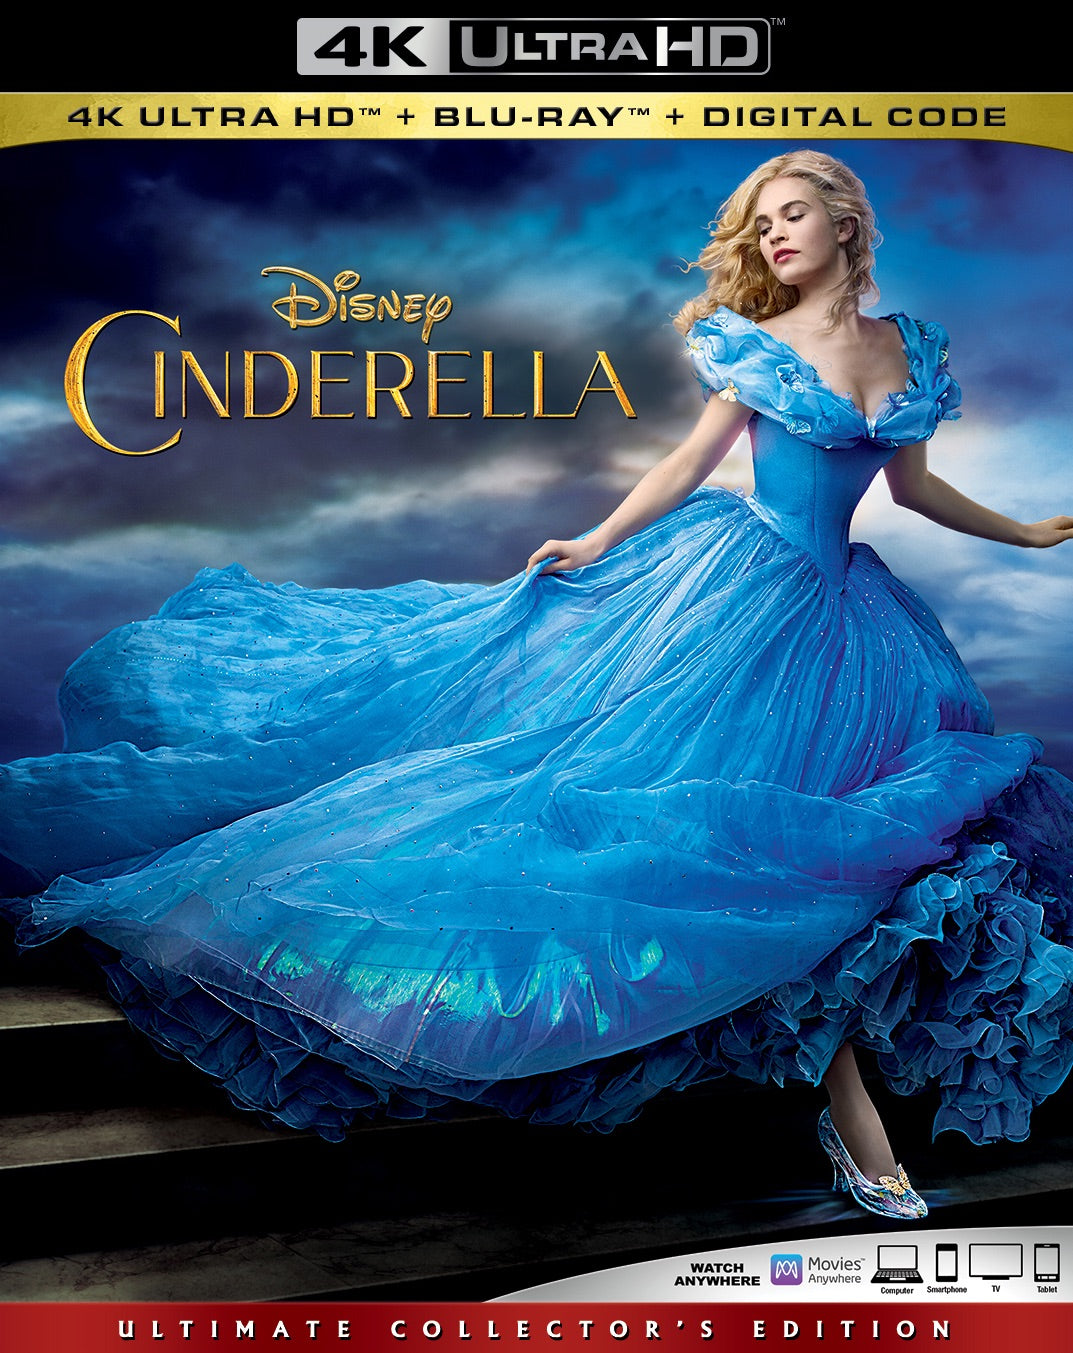 Cinderella (2015) Vudu or Movies Anywhere 4K redemption only